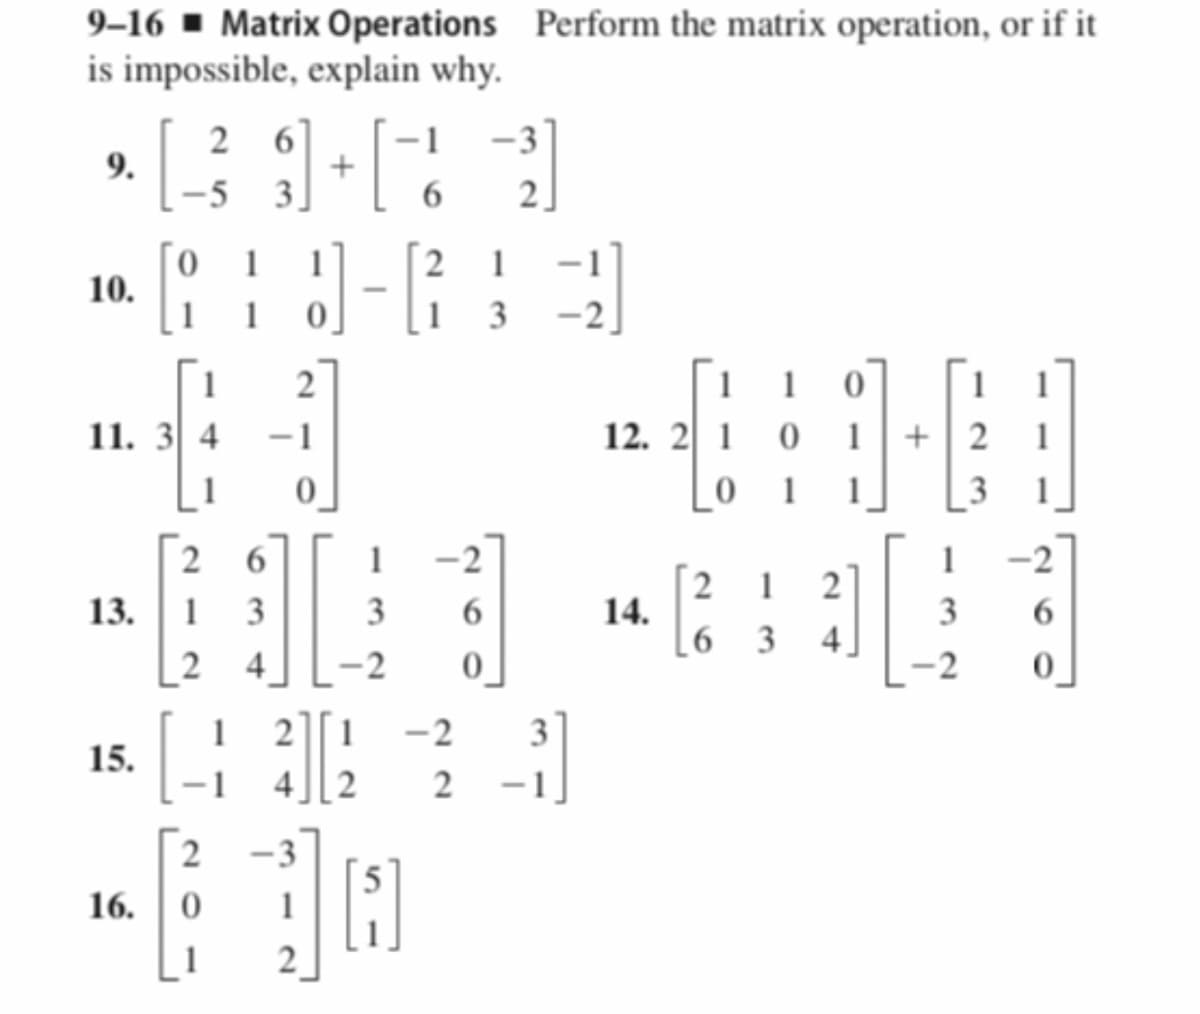 9–16 ▪ Matrix Operations Perform the matrix operation, or if it
is impossible, explain why.
2 6]
3]
-1
-3
9.
-5
6
2.
1
2
1
10.
1
1 3 -2]
1
1 1 0
12. 2 1 0
2
1
11. 3 4
-1
1
+| 2
1
0_
_0 1
2 6
1
-2
1
2 1
14.
[6 3
2
13. 1
3
3
3
4.
2
4][2
-2
3
15.
2
2
16.
